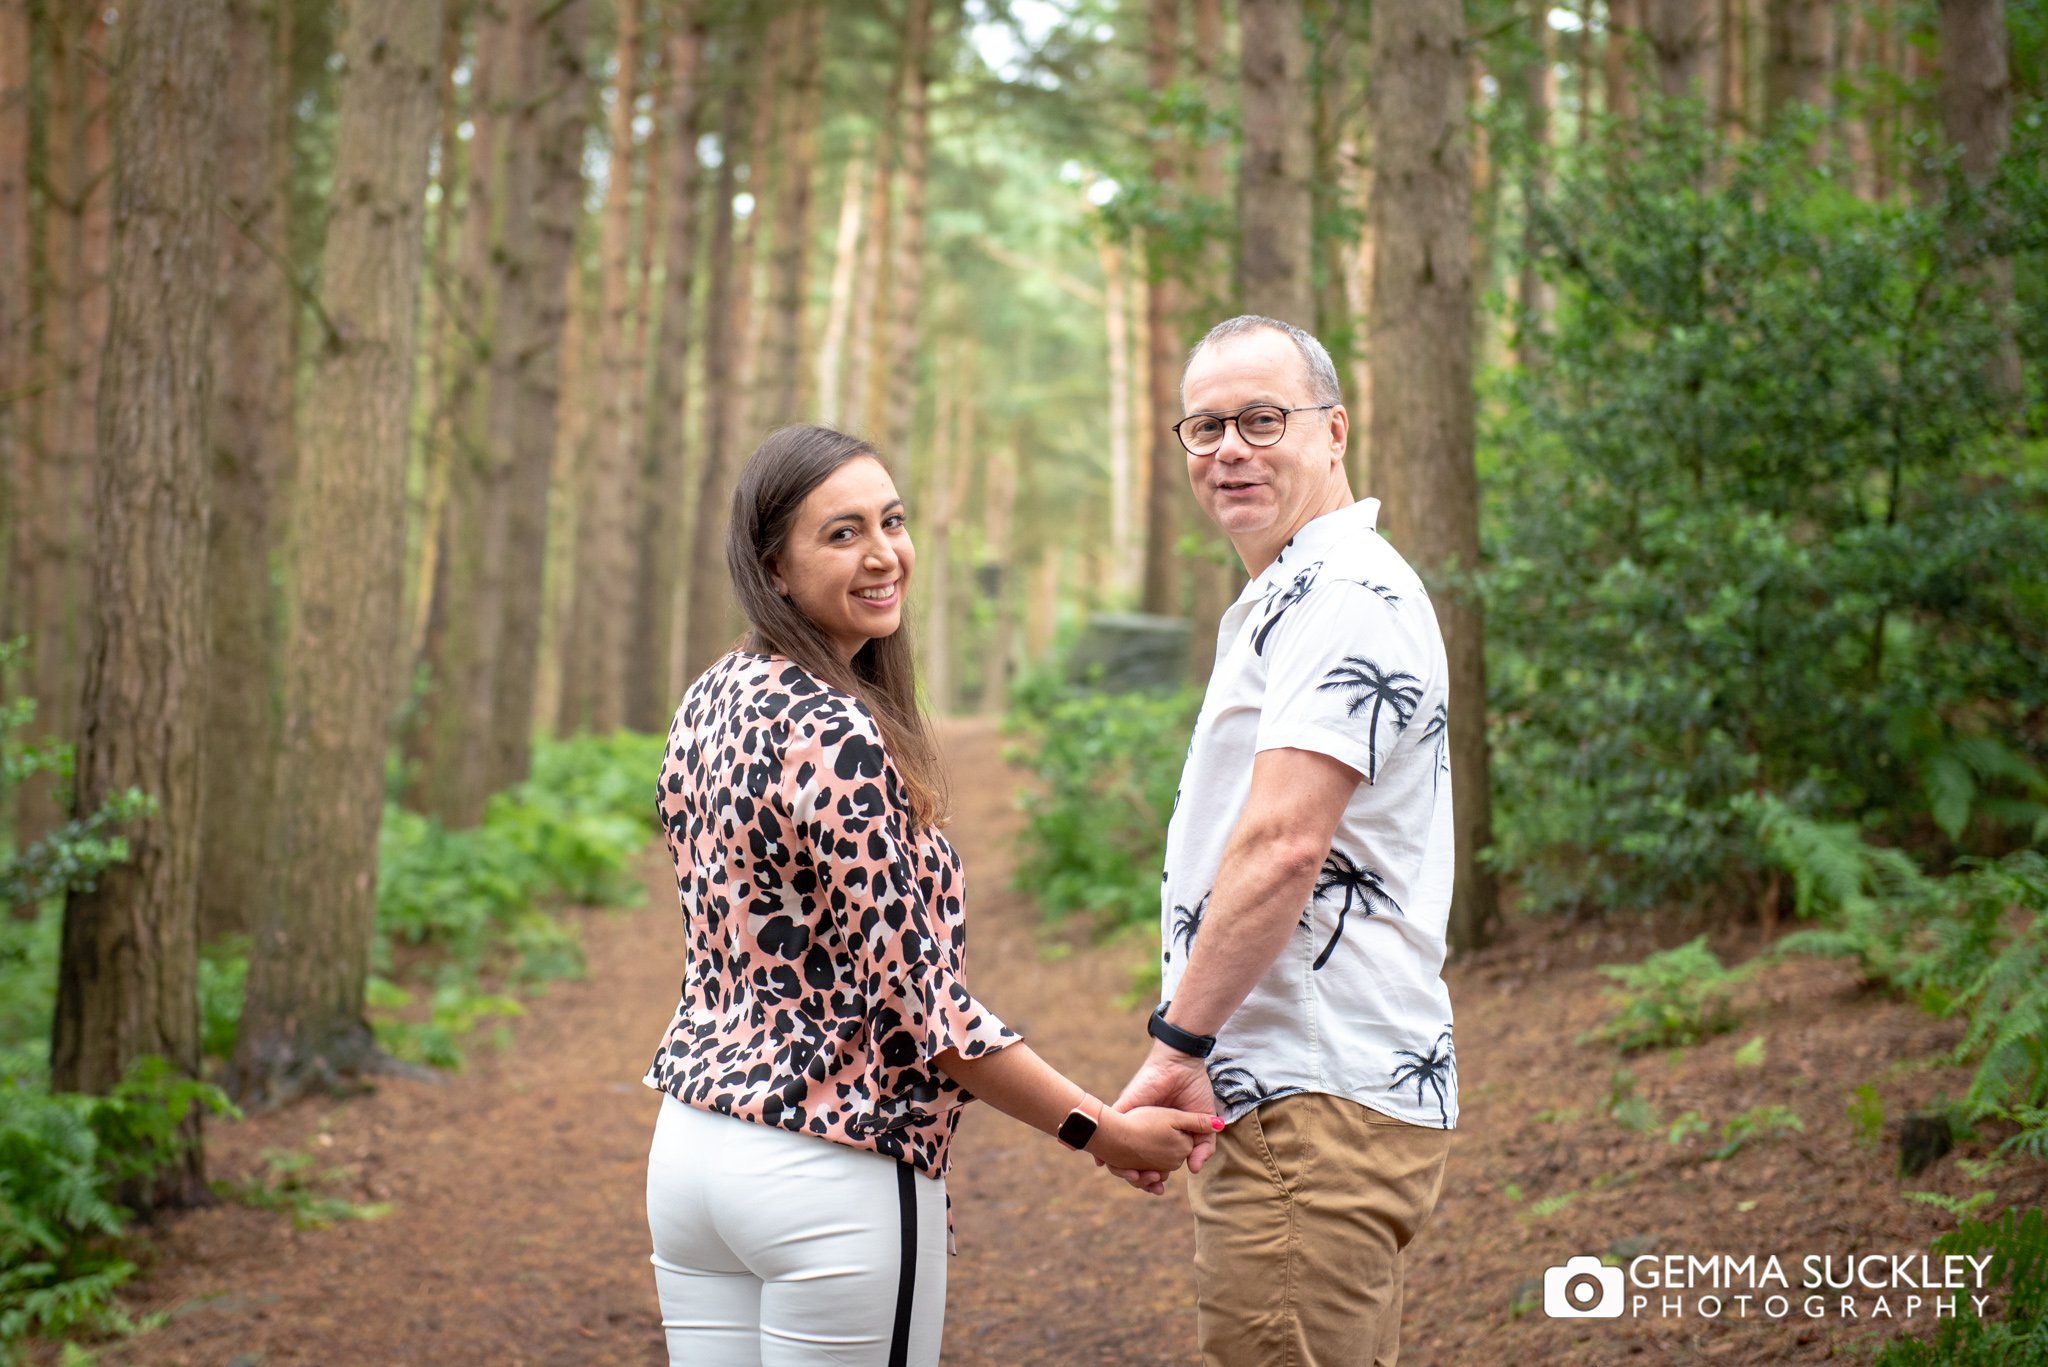 an engaged couple walking in the woods during a photo shoot